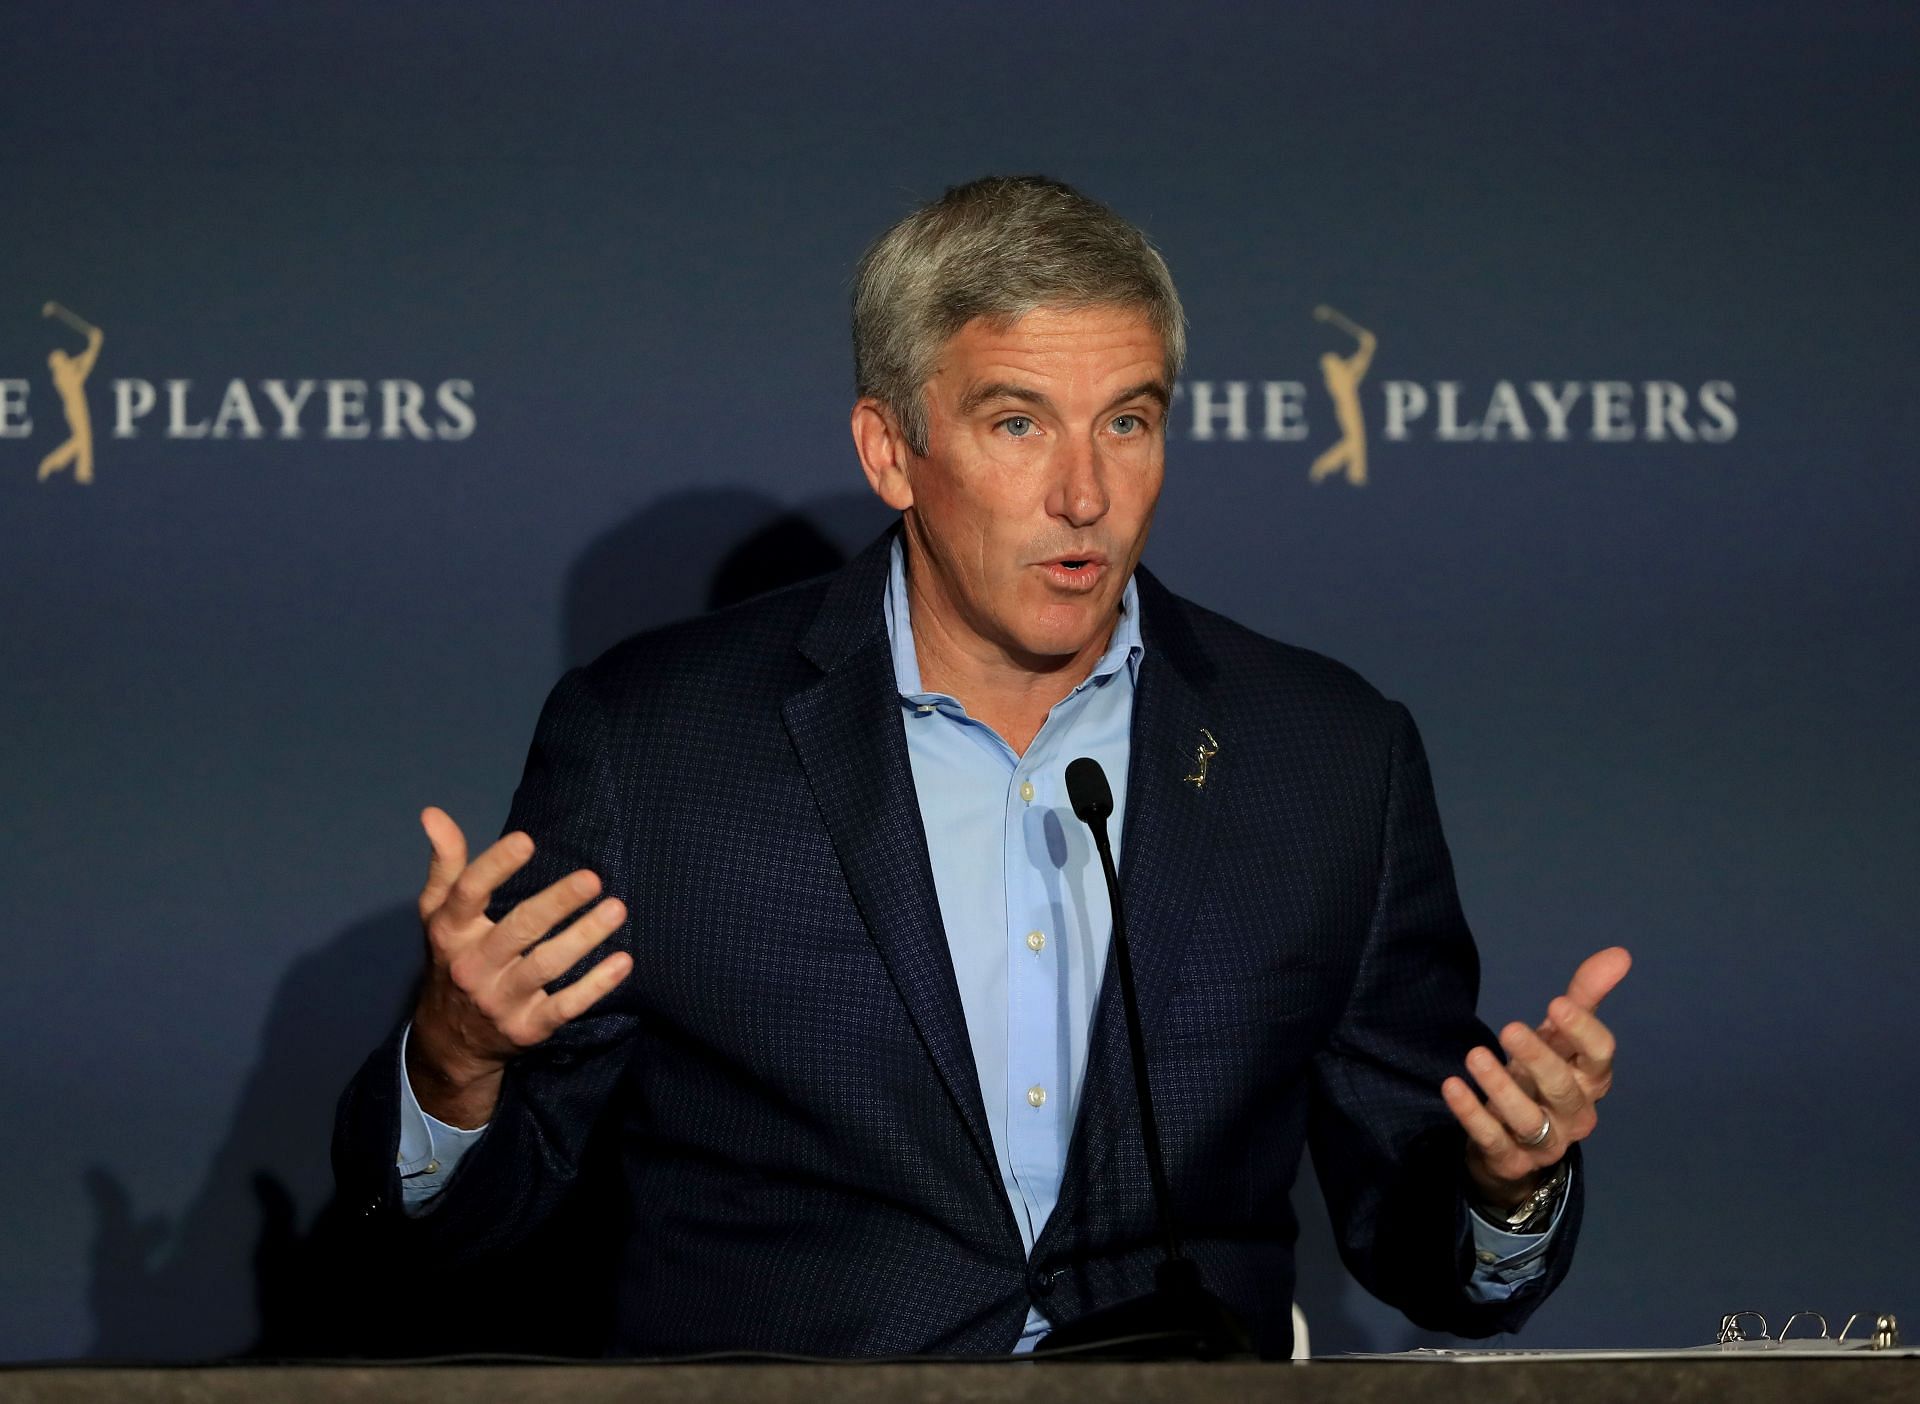 Jay Monahan addresses the media after suspending the 2020 Players Championship